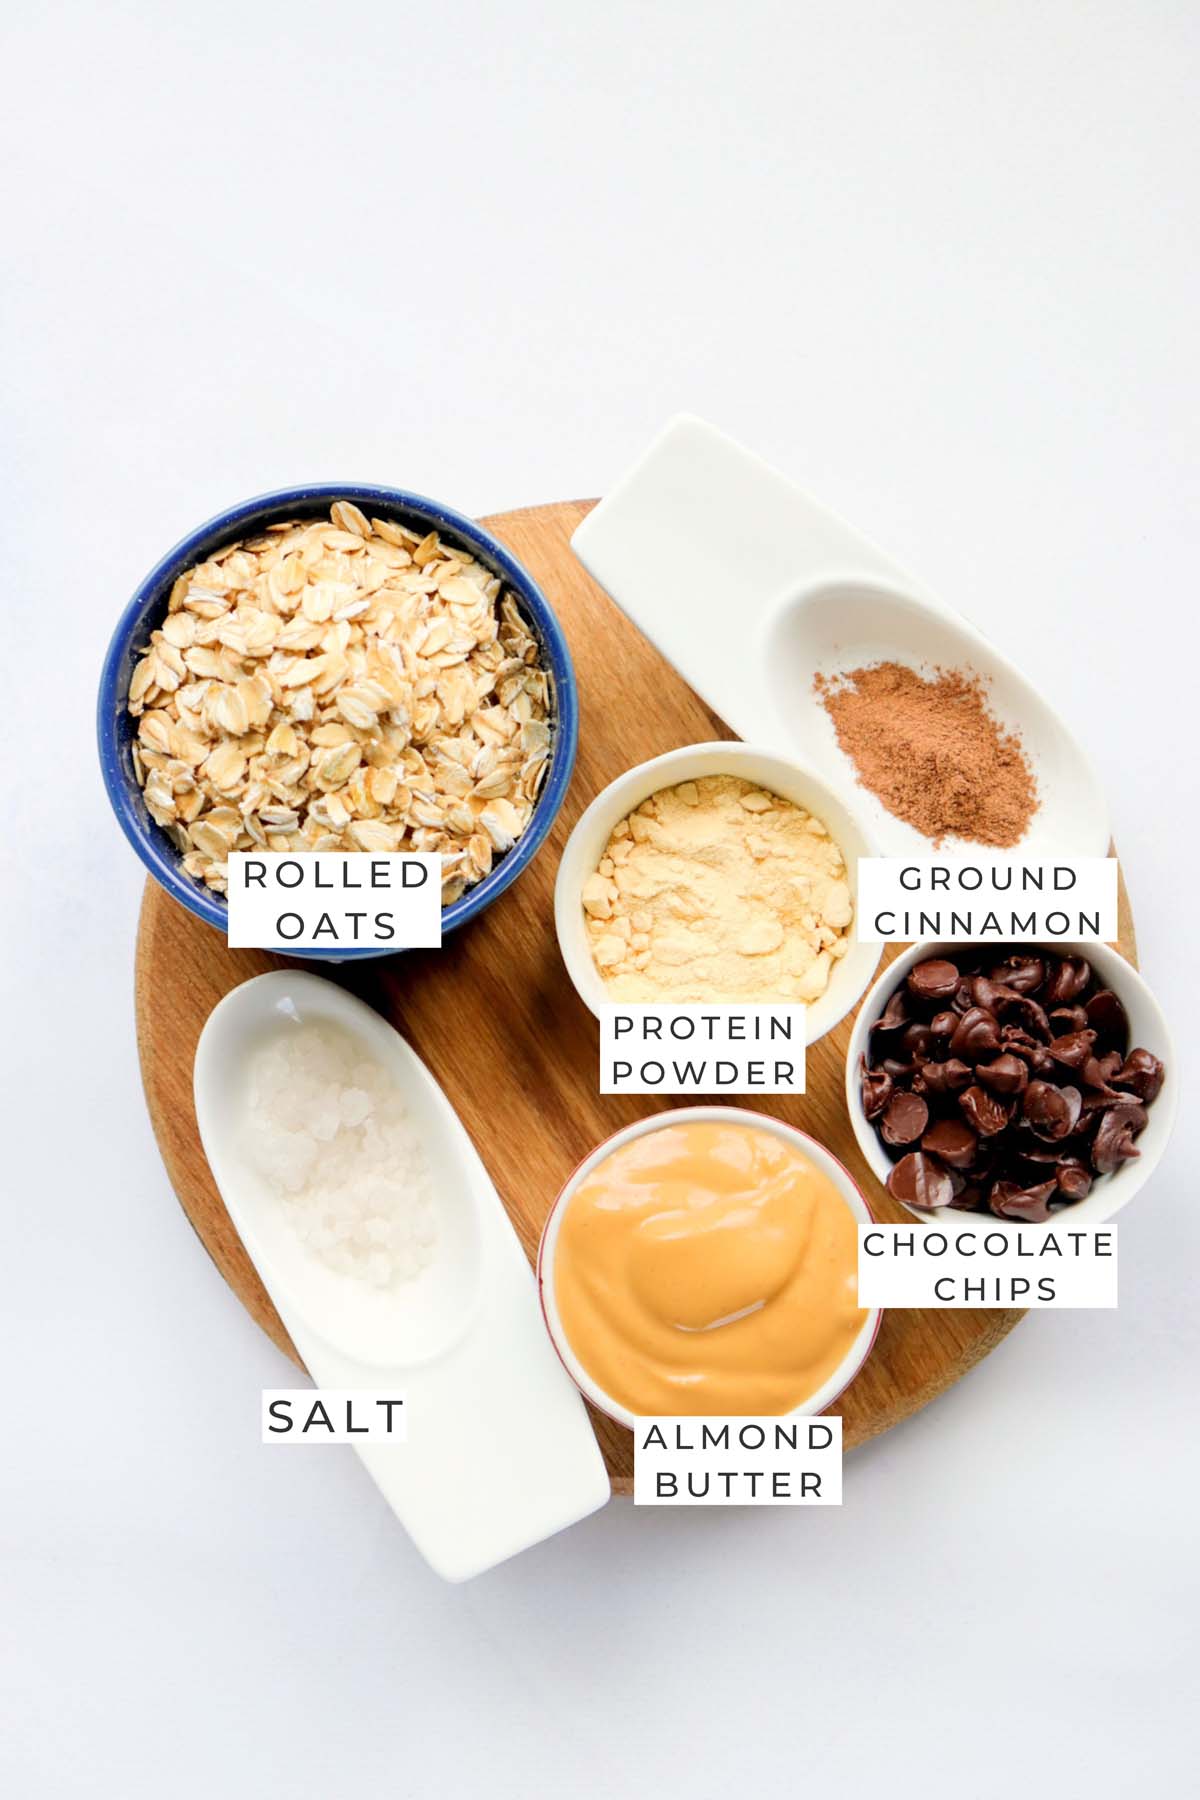 Labeled ingredients for the energy balls.